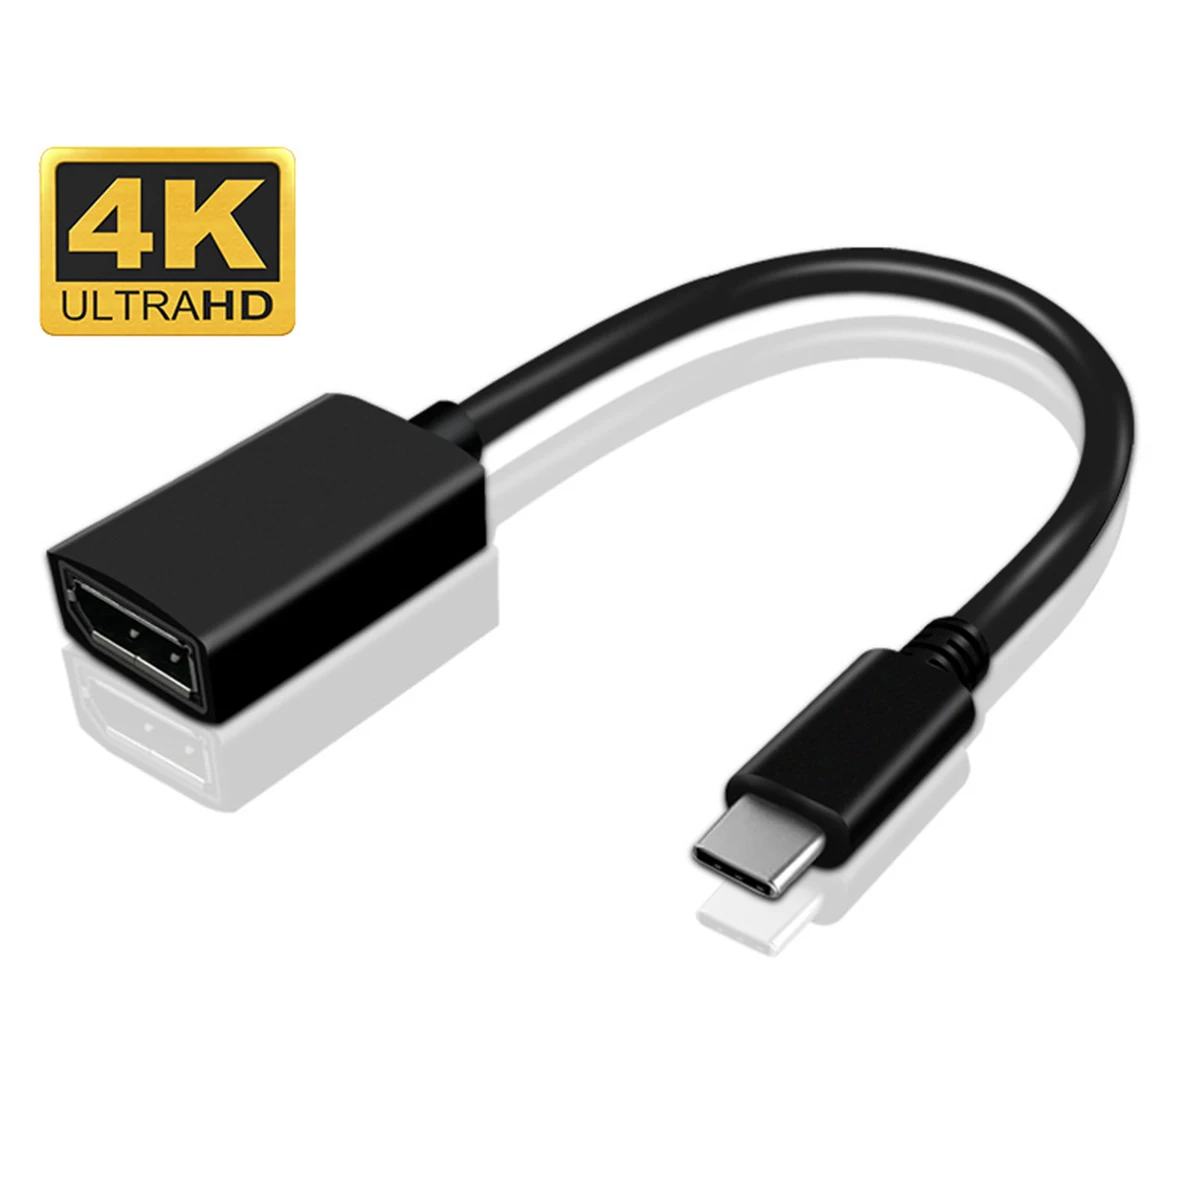 USB C to DisplayPort 4K@60Hz Adapter Thunderbolt 3 to Dp Male to Female Converter for MacBook Pro 2015/2016 ChromeBook Pixel